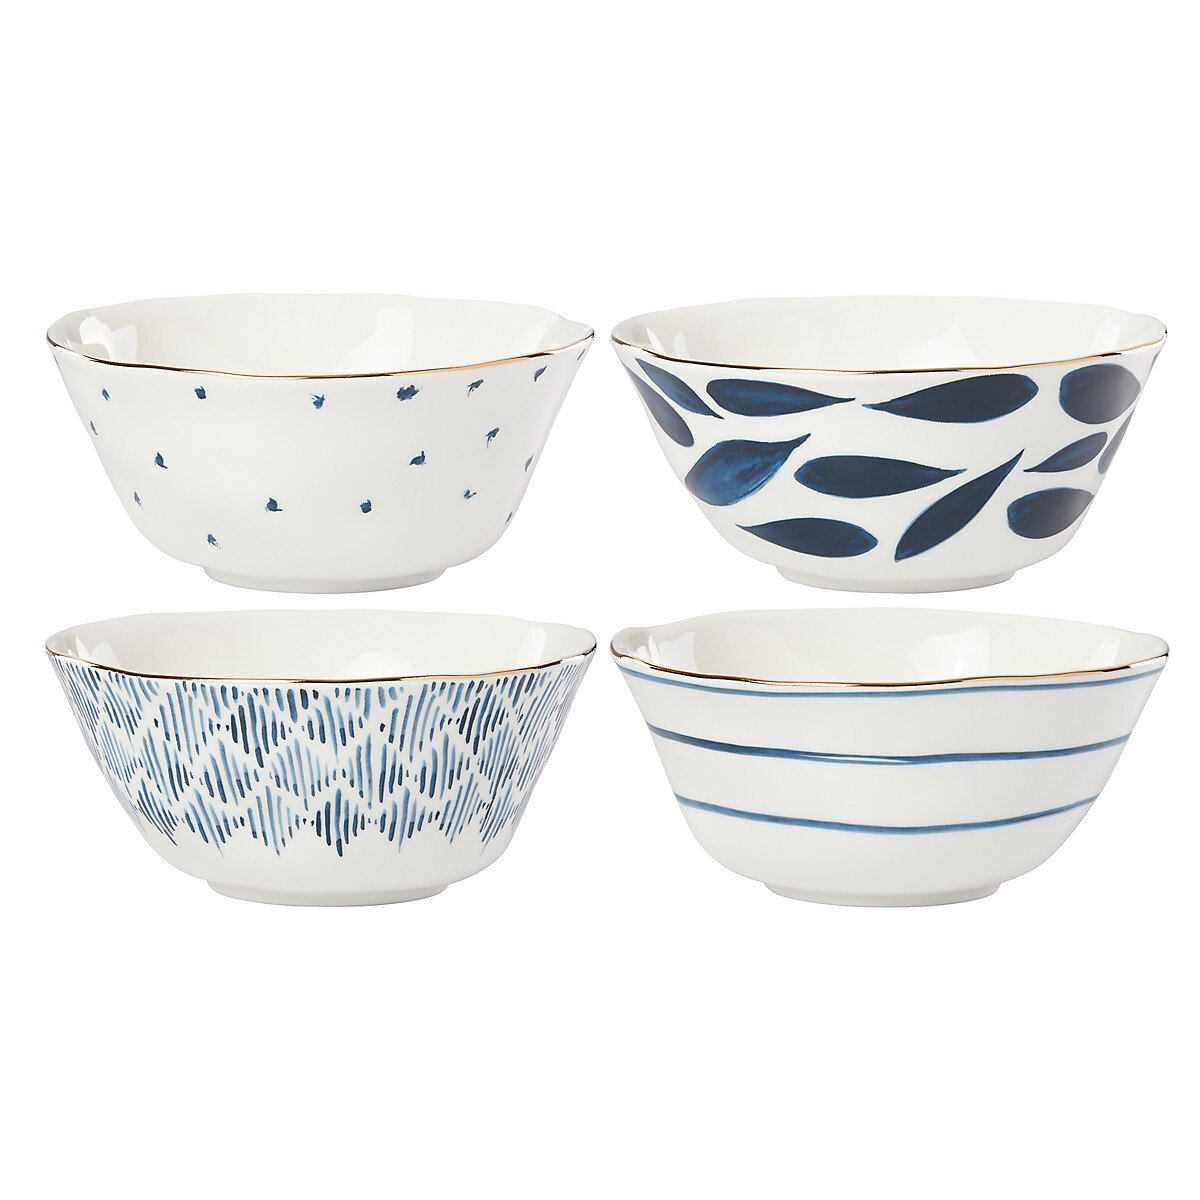 Fruits of Life 6 All Purpose Bowl by Lenox